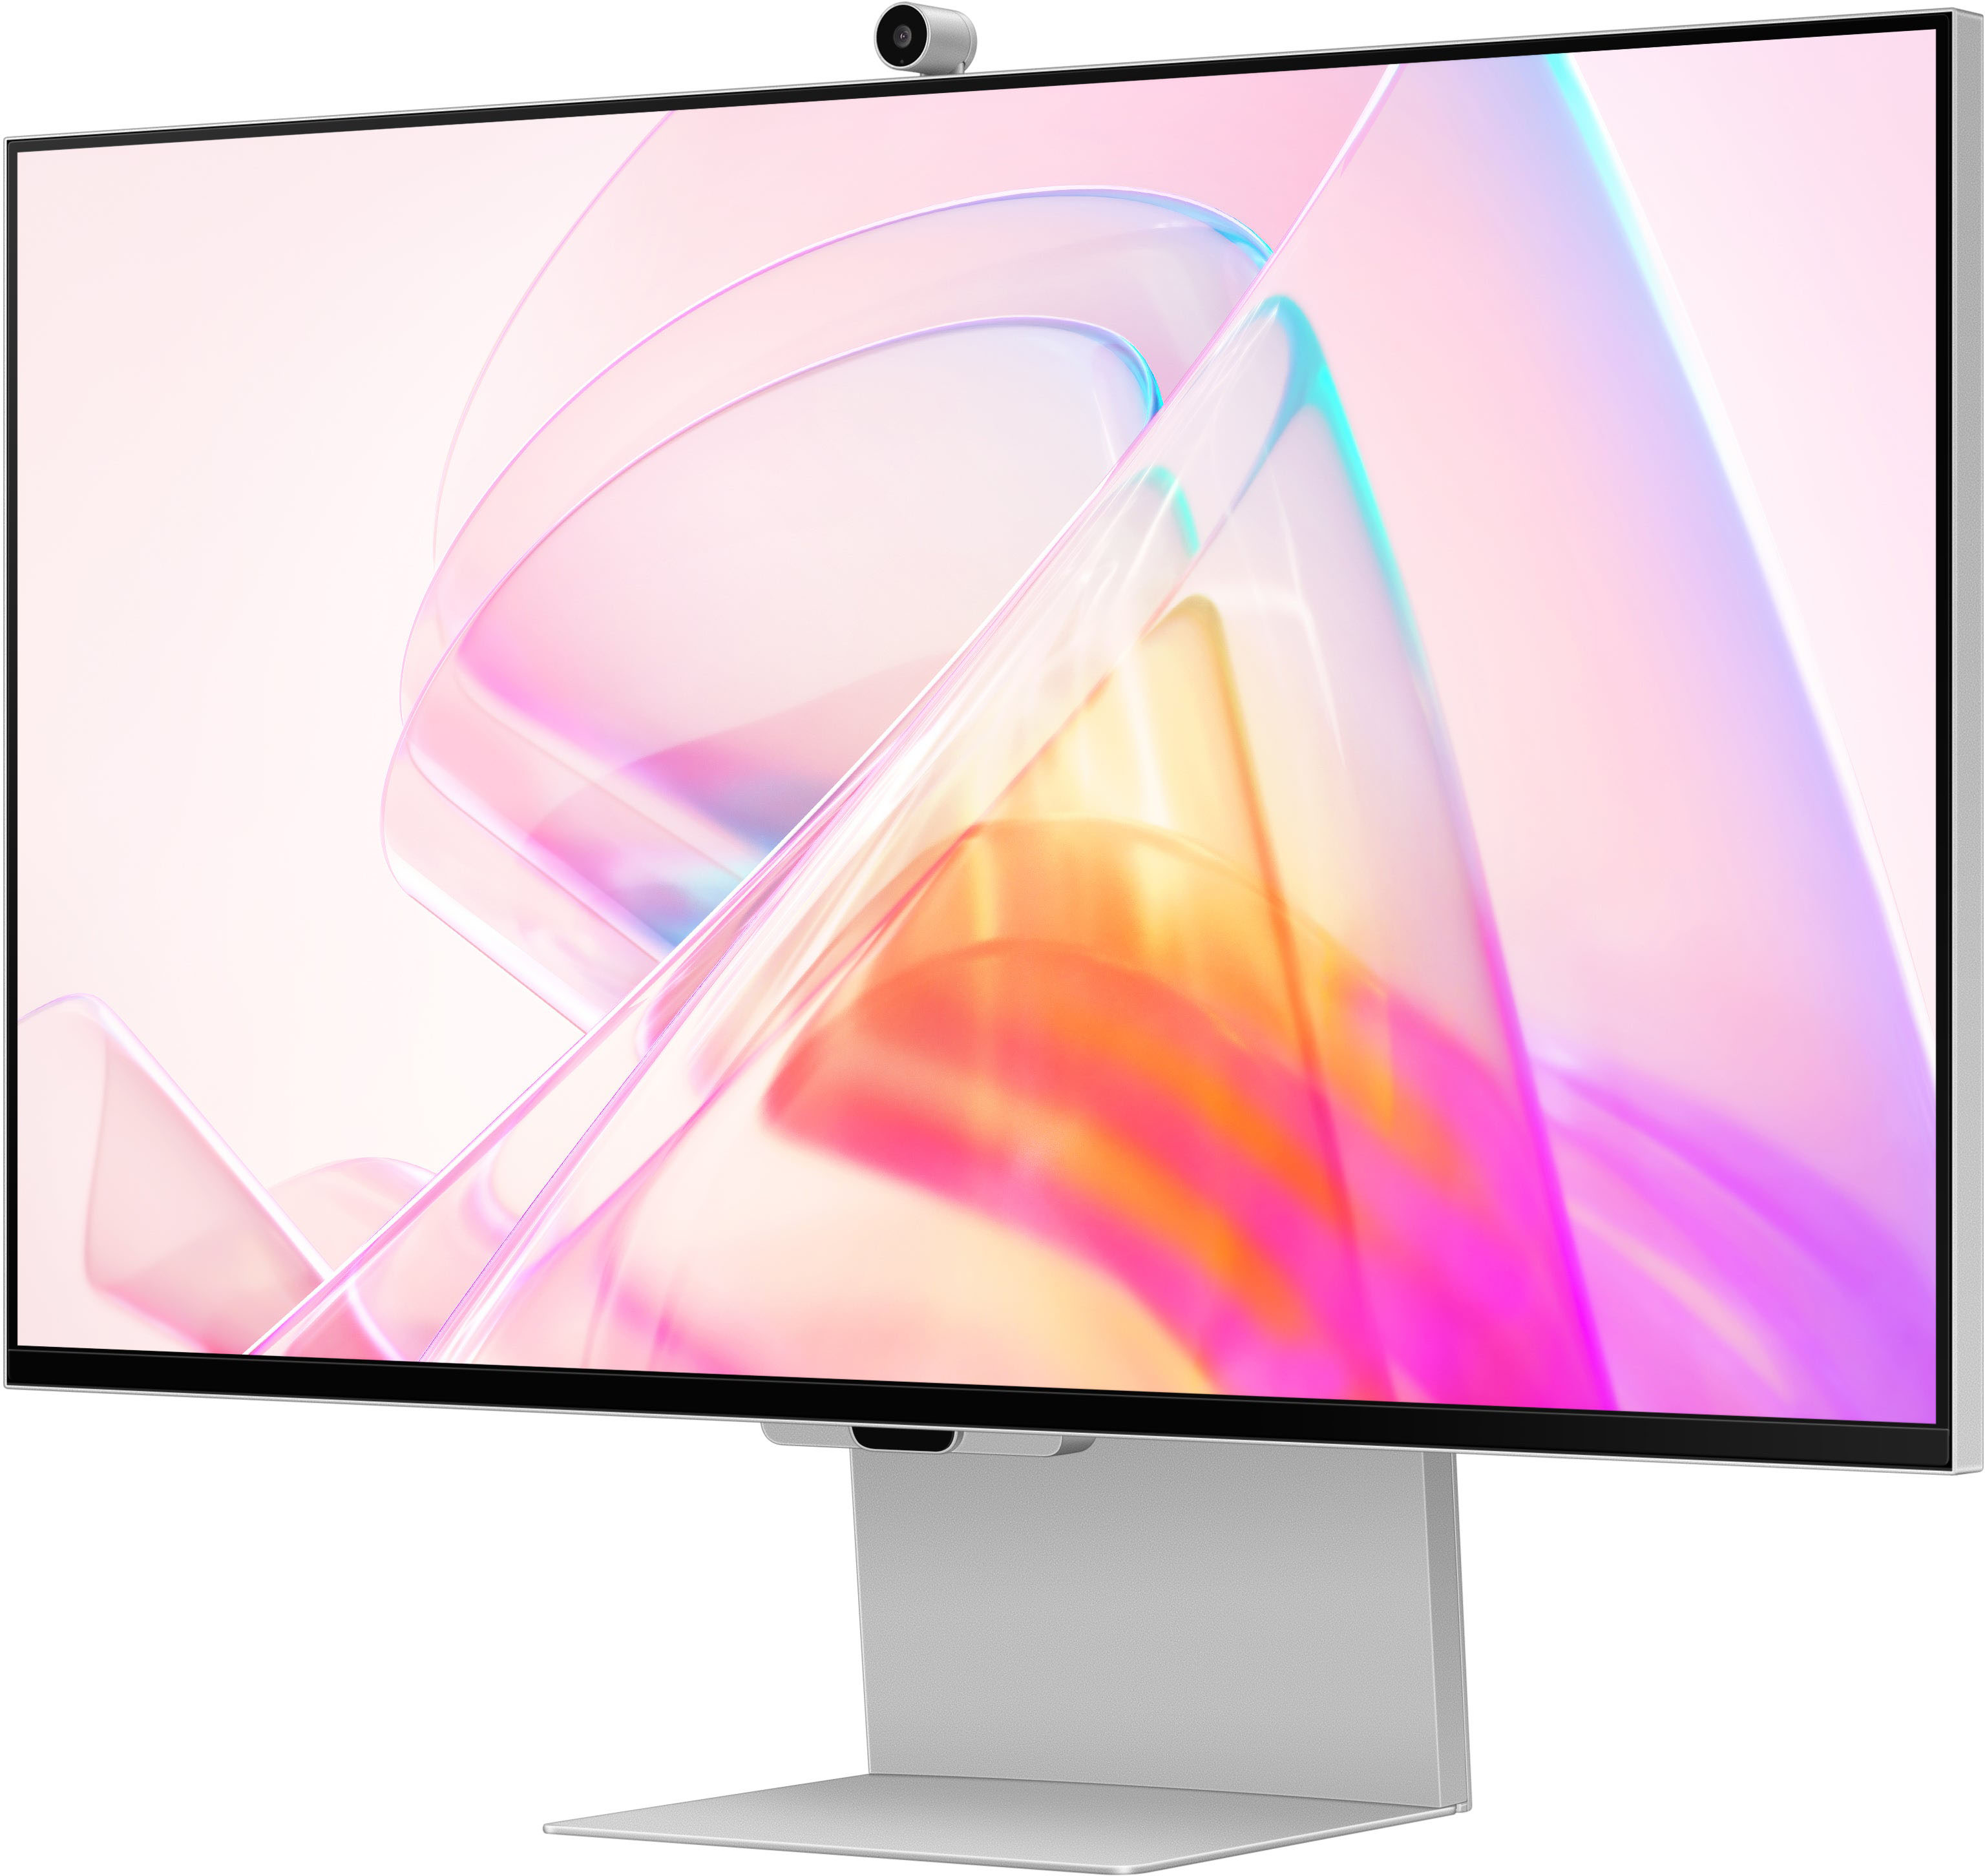 Samsung 27 ViewFinity S9 5K IPS Smart Monitor with Matte Display,  Thunderbolt 4 and SlimFit Camera. Silver LS27C900PANXZA - Best Buy